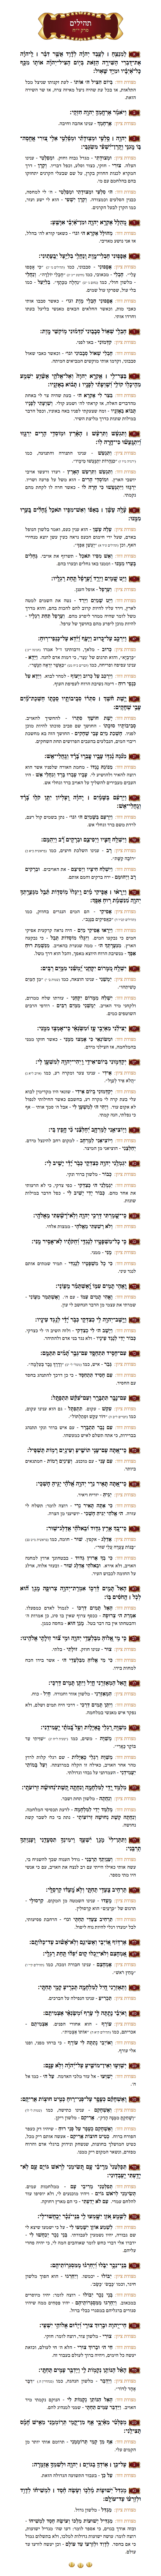 Sefer Tehillim Chapter 108 with commentary